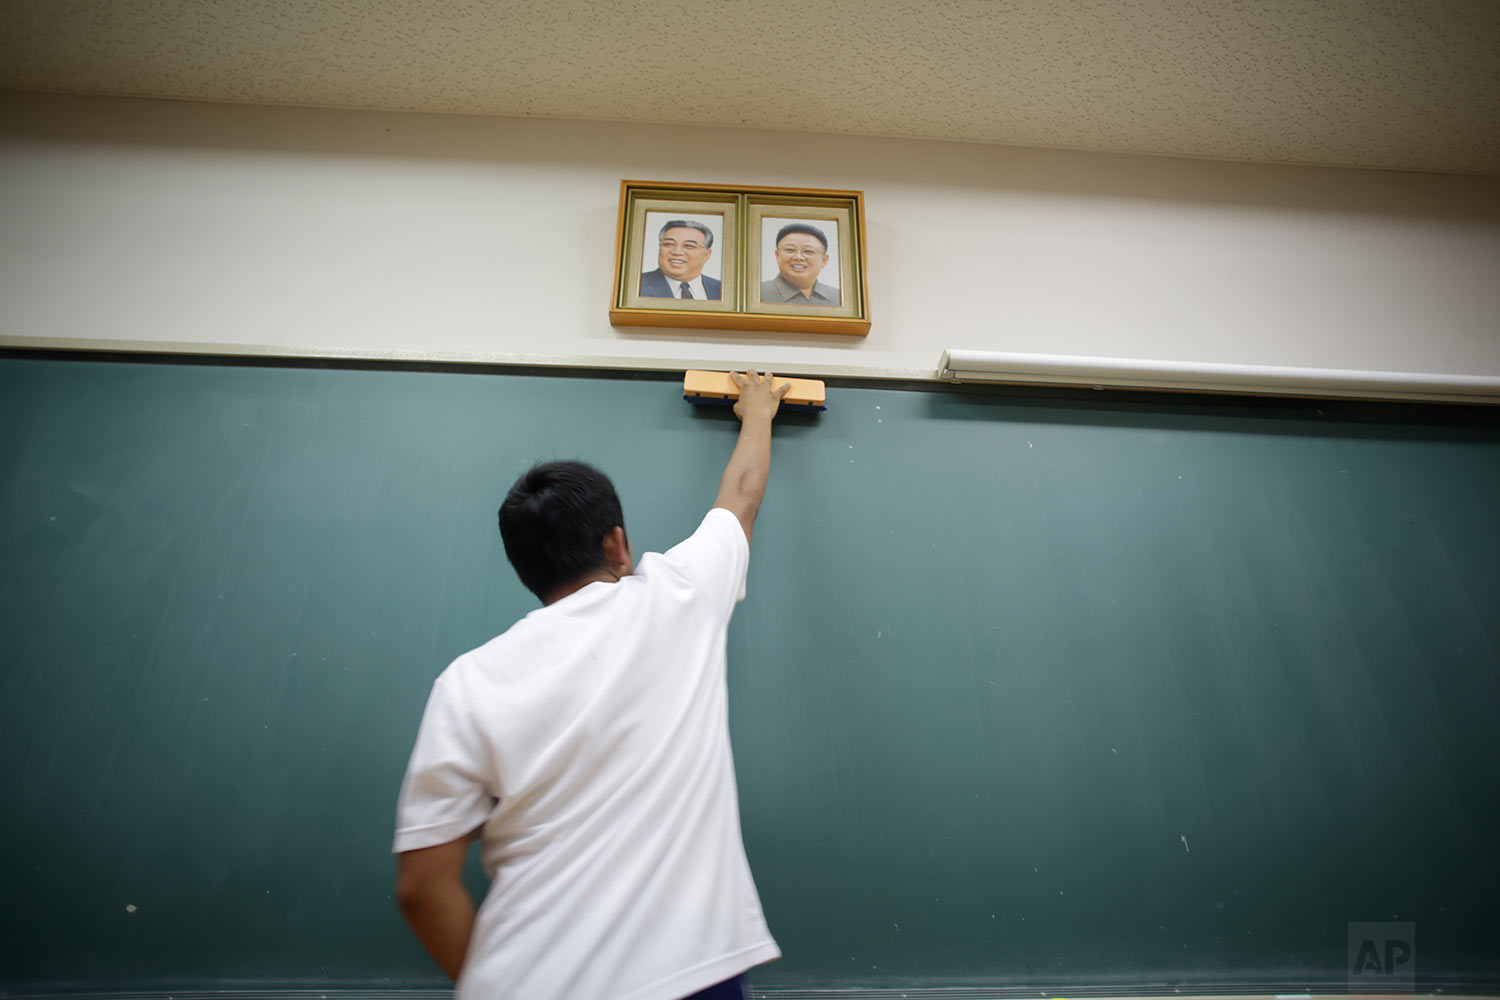  In this Sept. 26, 2017, photo, a student cleans the blackboard under the portraits of the late North Korean leaders Kim Il Sung and Kim Jong Il hanging in classroom at a Korean high school in Tokyo.  (AP Photo/Eugene Hoshiko) 